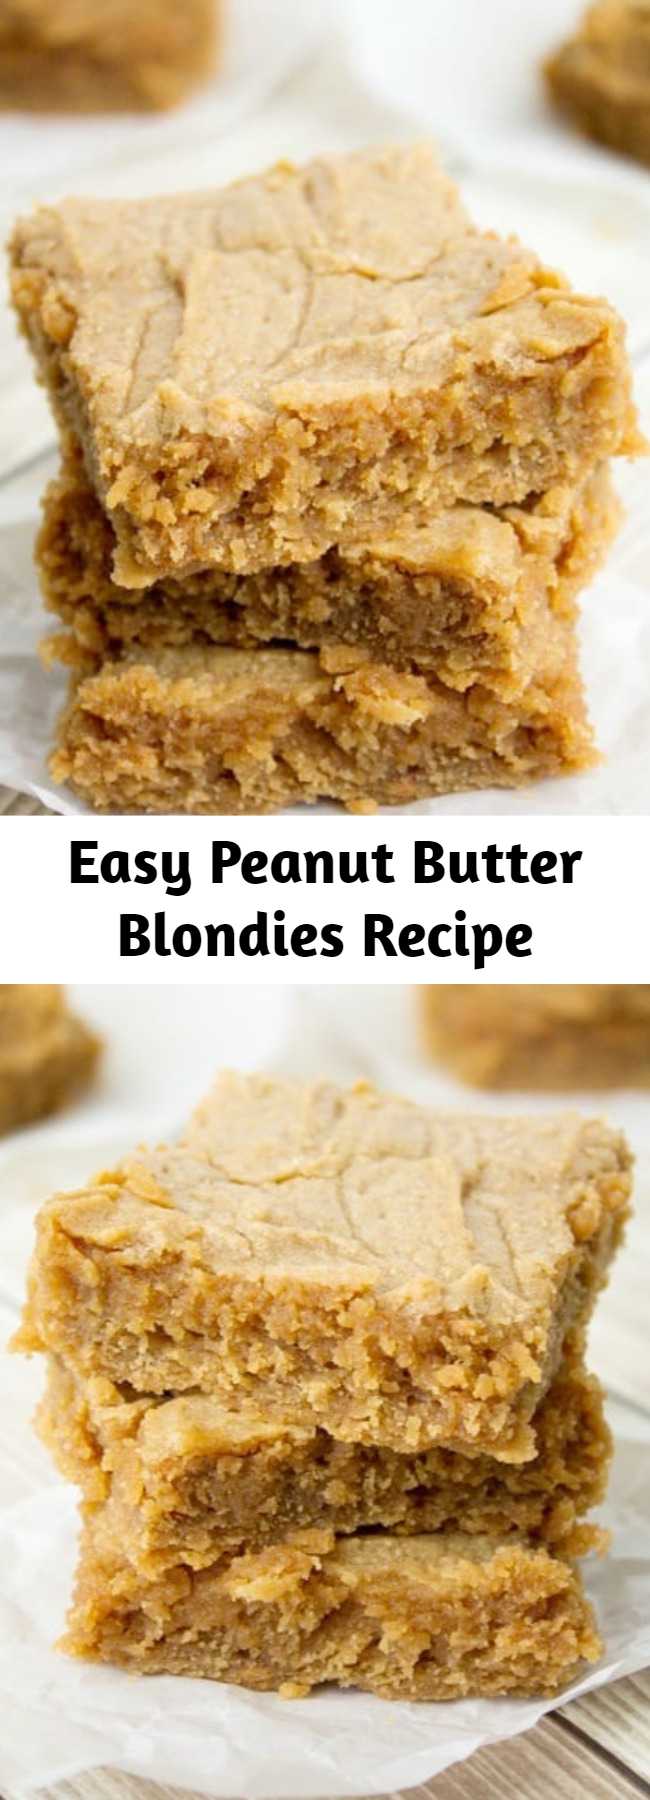 Easy Peanut Butter Blondies Recipe - An easy and delicious peanut butter blondie recipe – you will not miss the chocolate at all. Great peanut butter taste and an ultra-fudgy center.